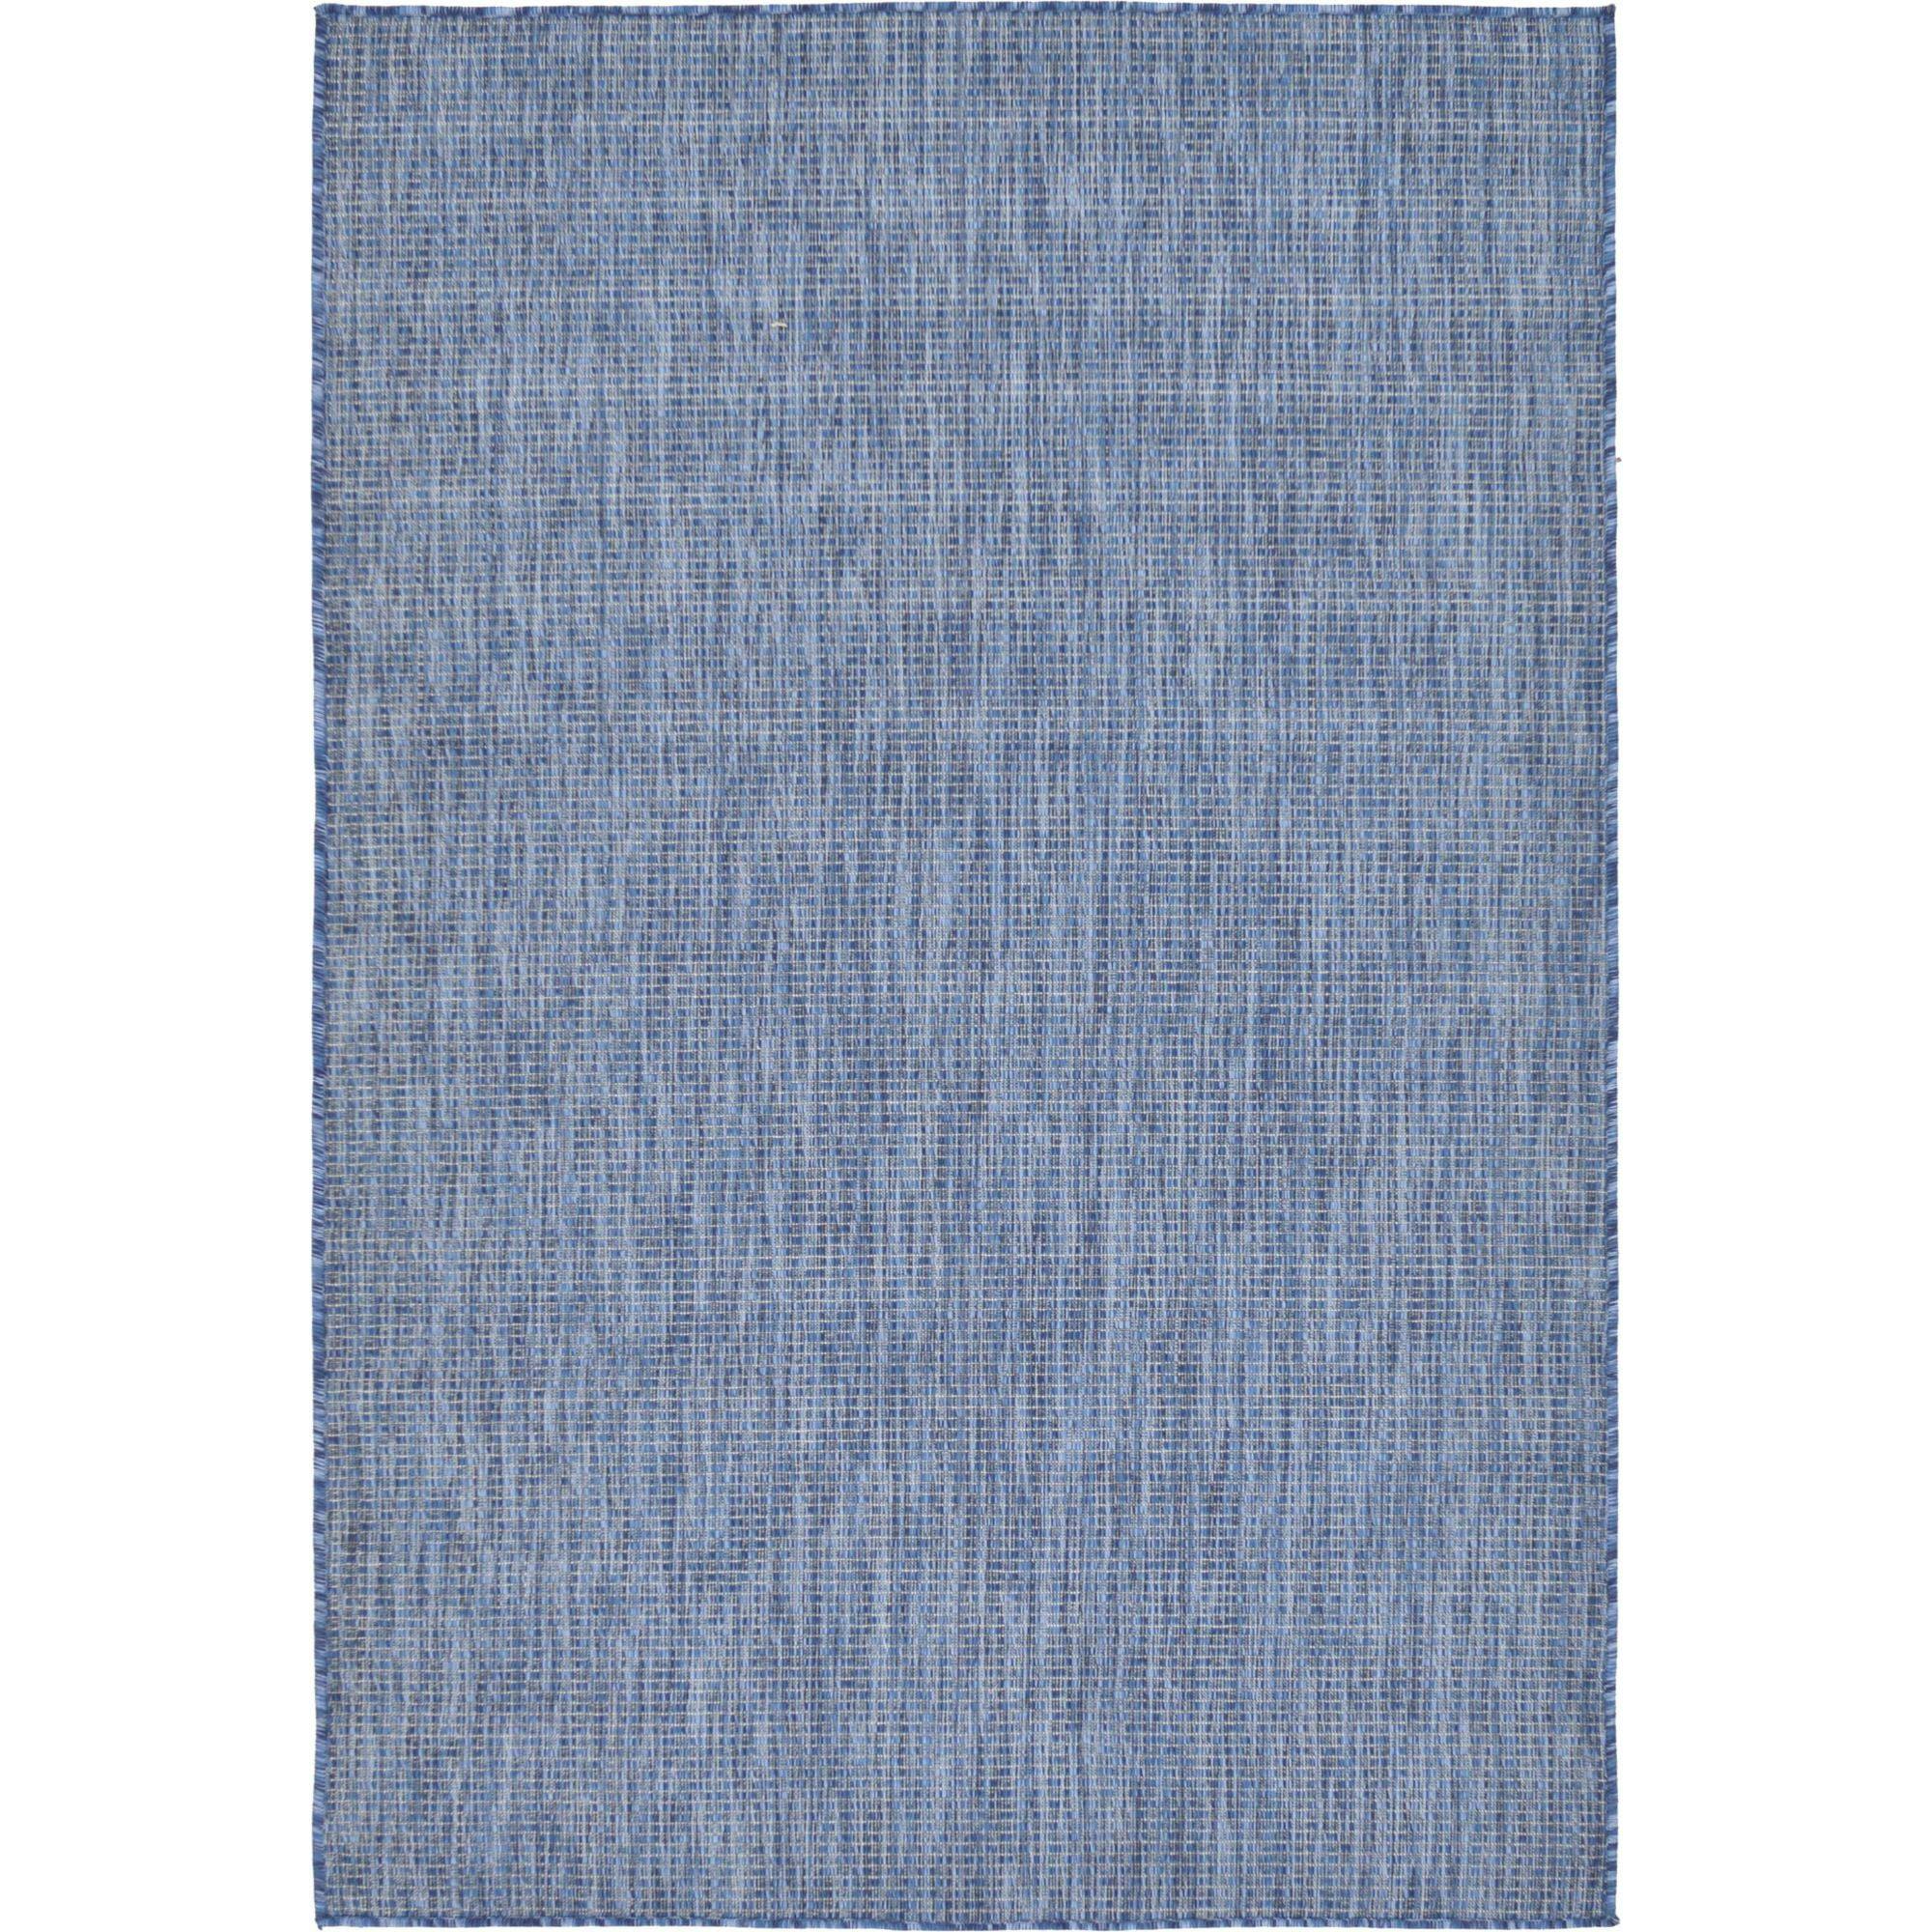 Navy Blue Synthetic 4' x 6' Outdoor Flat Woven Rug